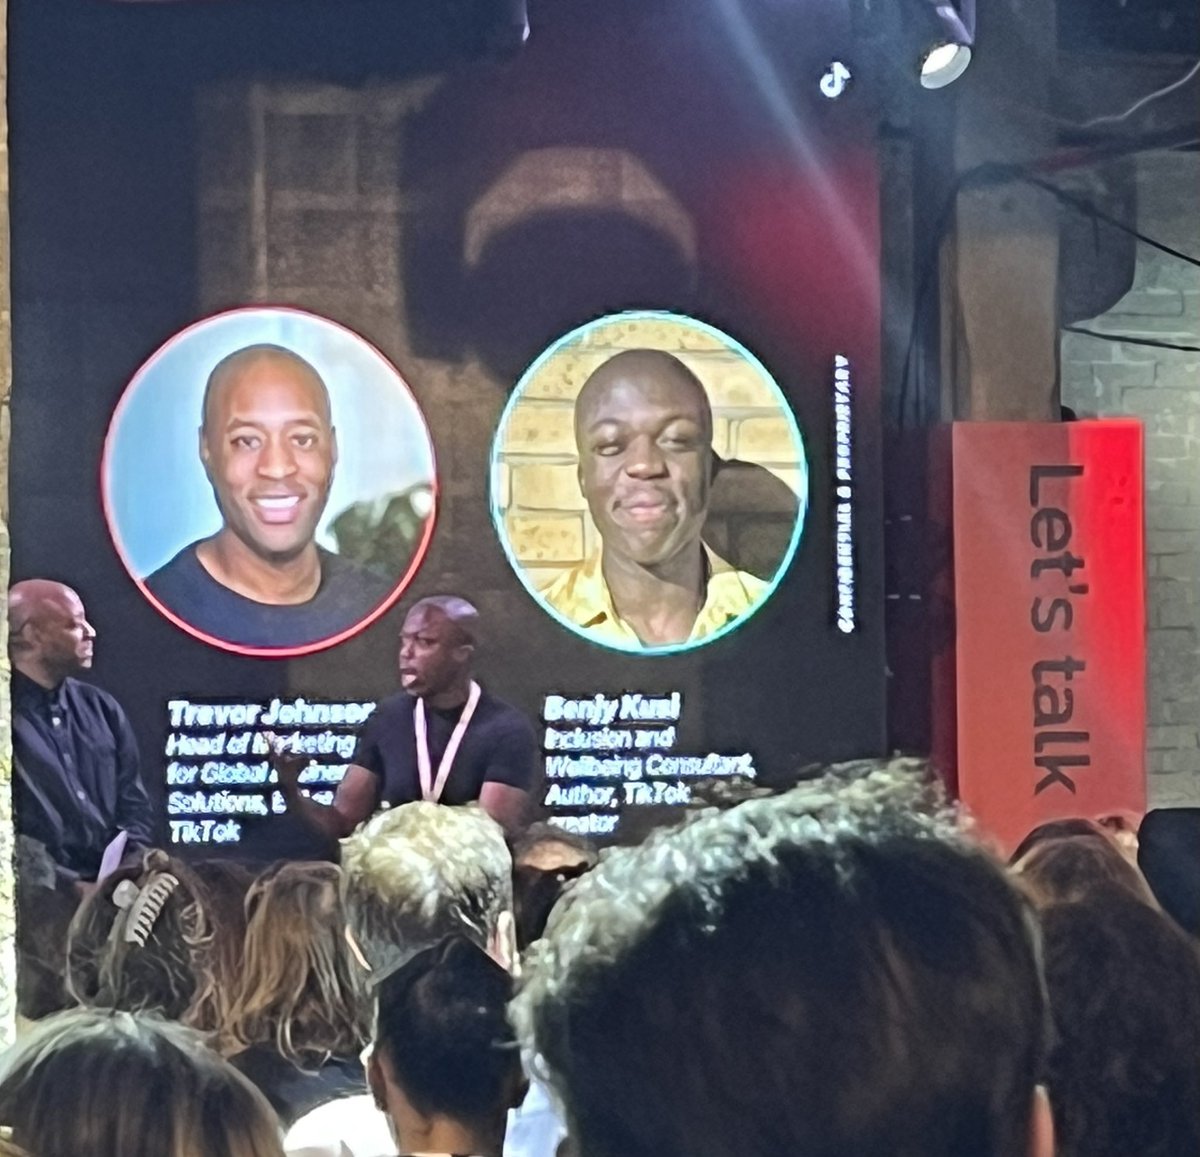 @The_IPA Talent & Diversity Conference 2024, just heard @lemnsissay, Trevor Johnson & Benjy Kusi. Standout statement so far “Levels of diversity in the industry are declining”. Now to the business case for diversity and the power of the industry for change @ideasfoundation